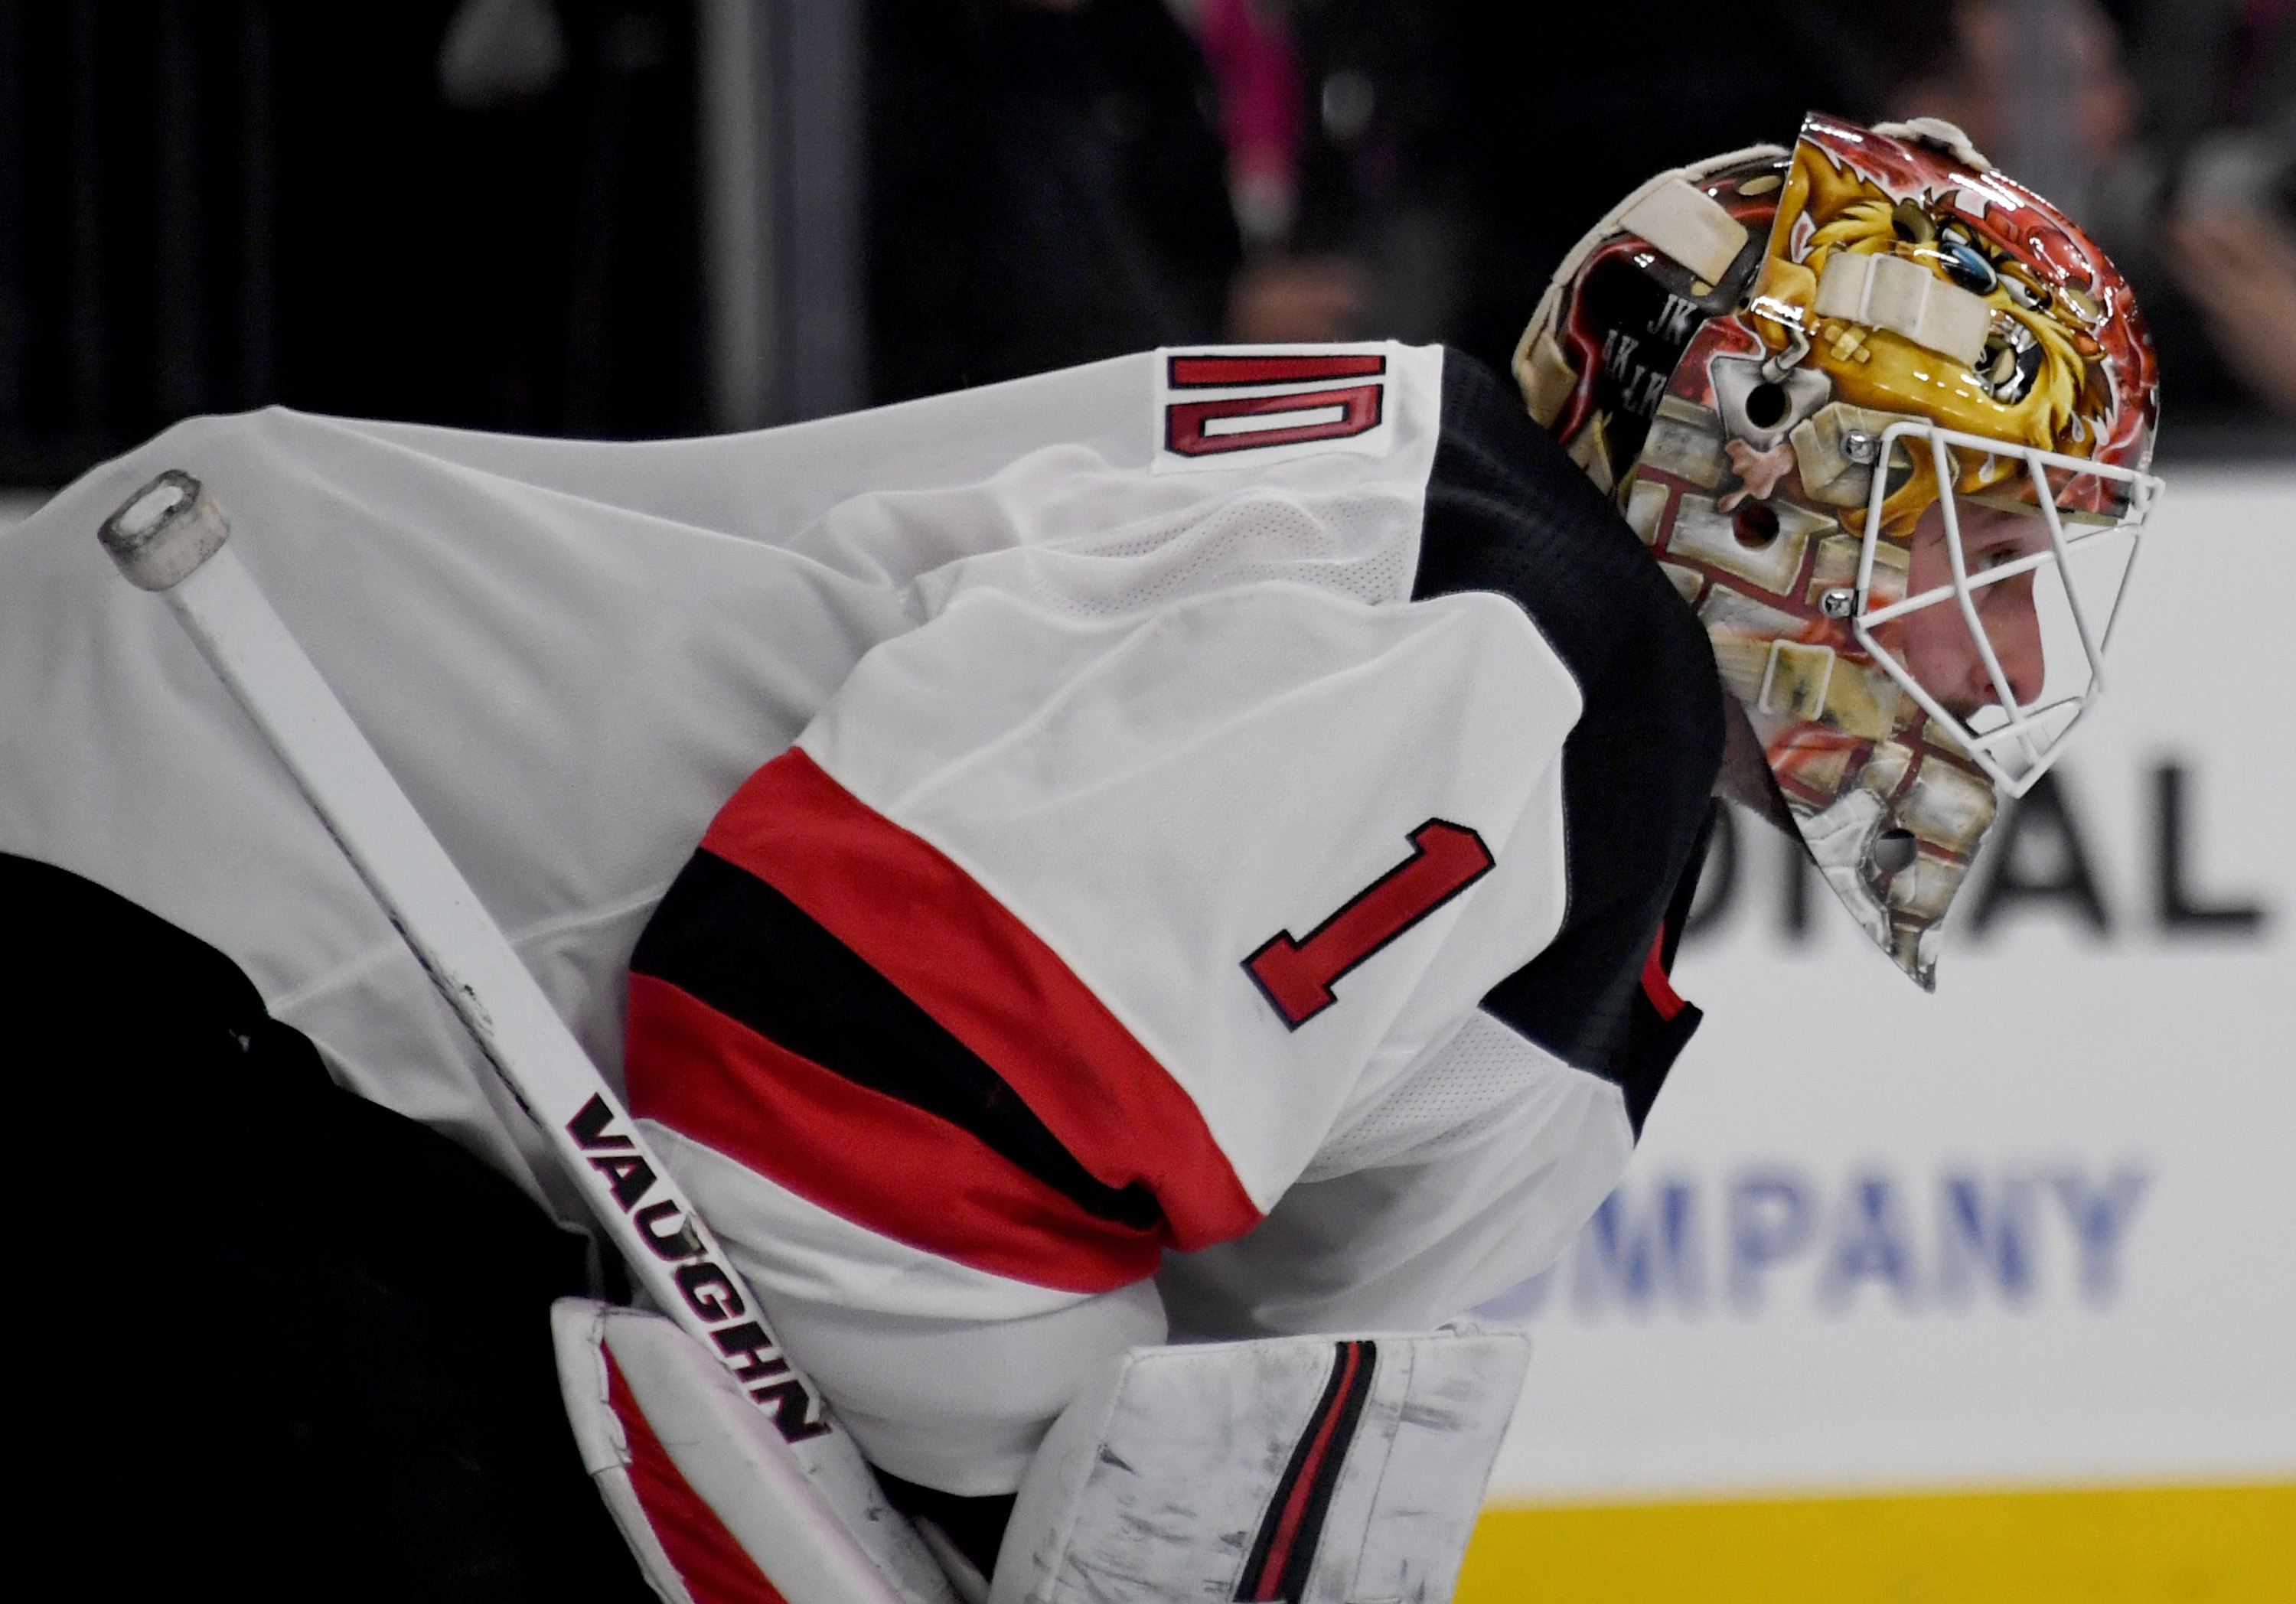 New Jersey Devils sign goaltender Keith Kinkaid to two-way